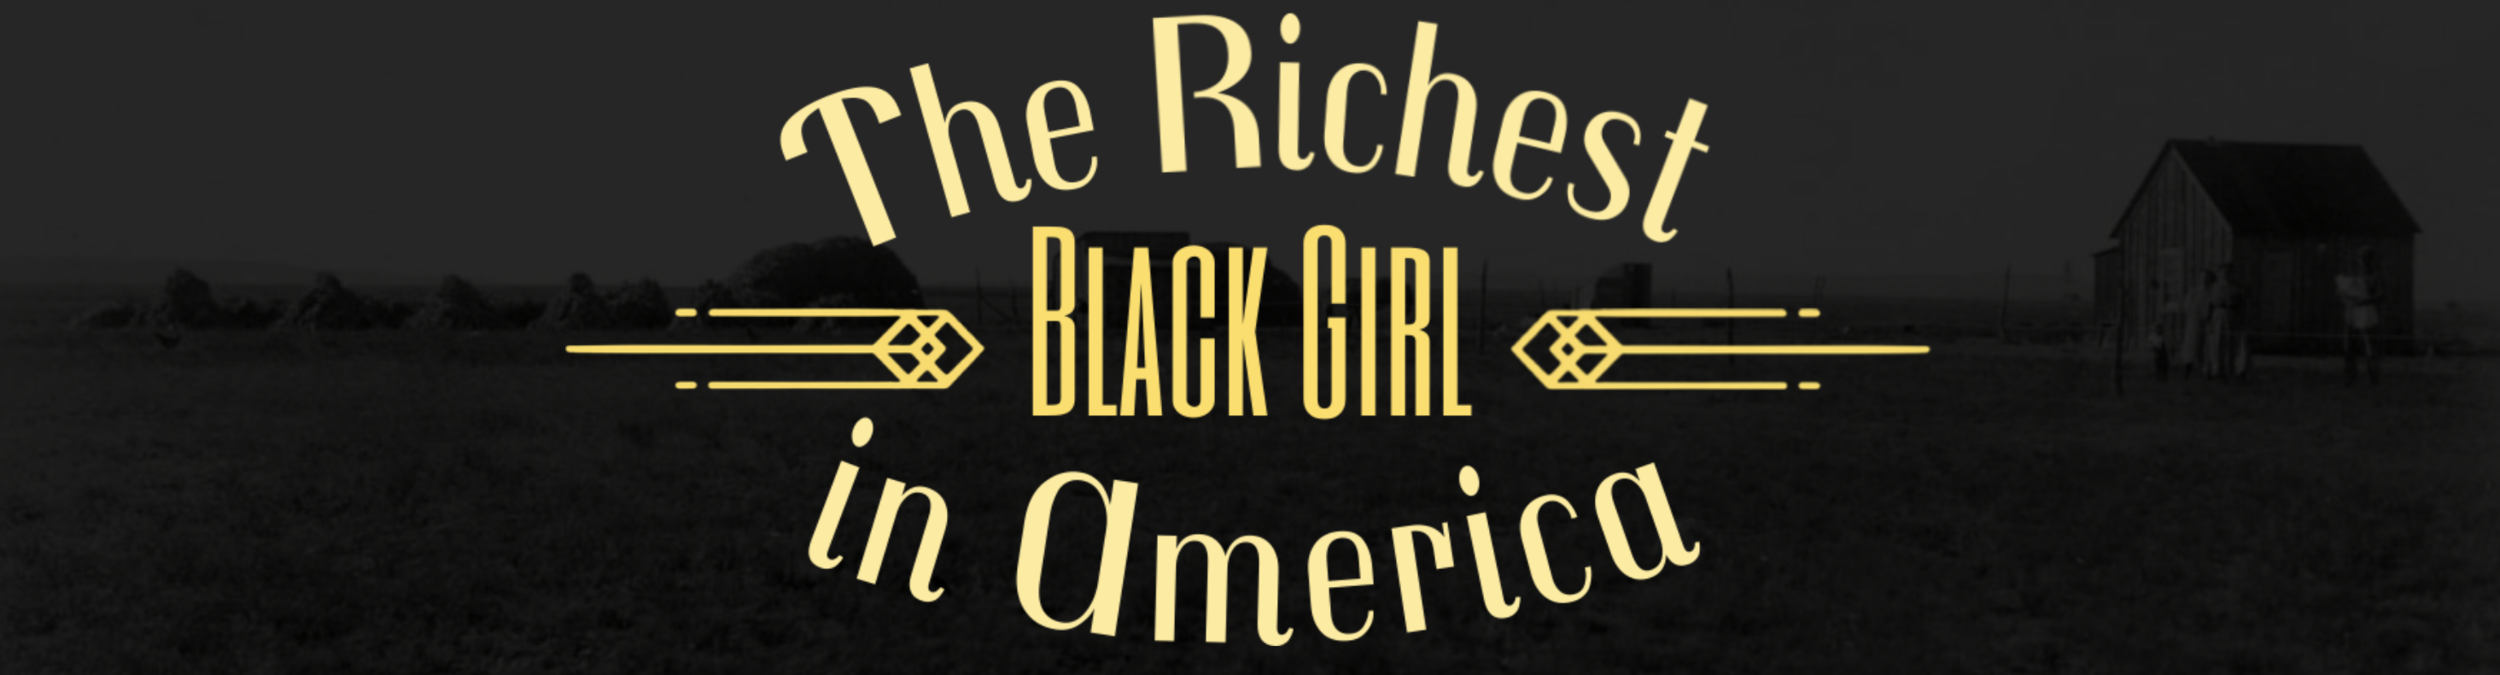 How an 11-Year-Old Became the Richest Black Girl in America